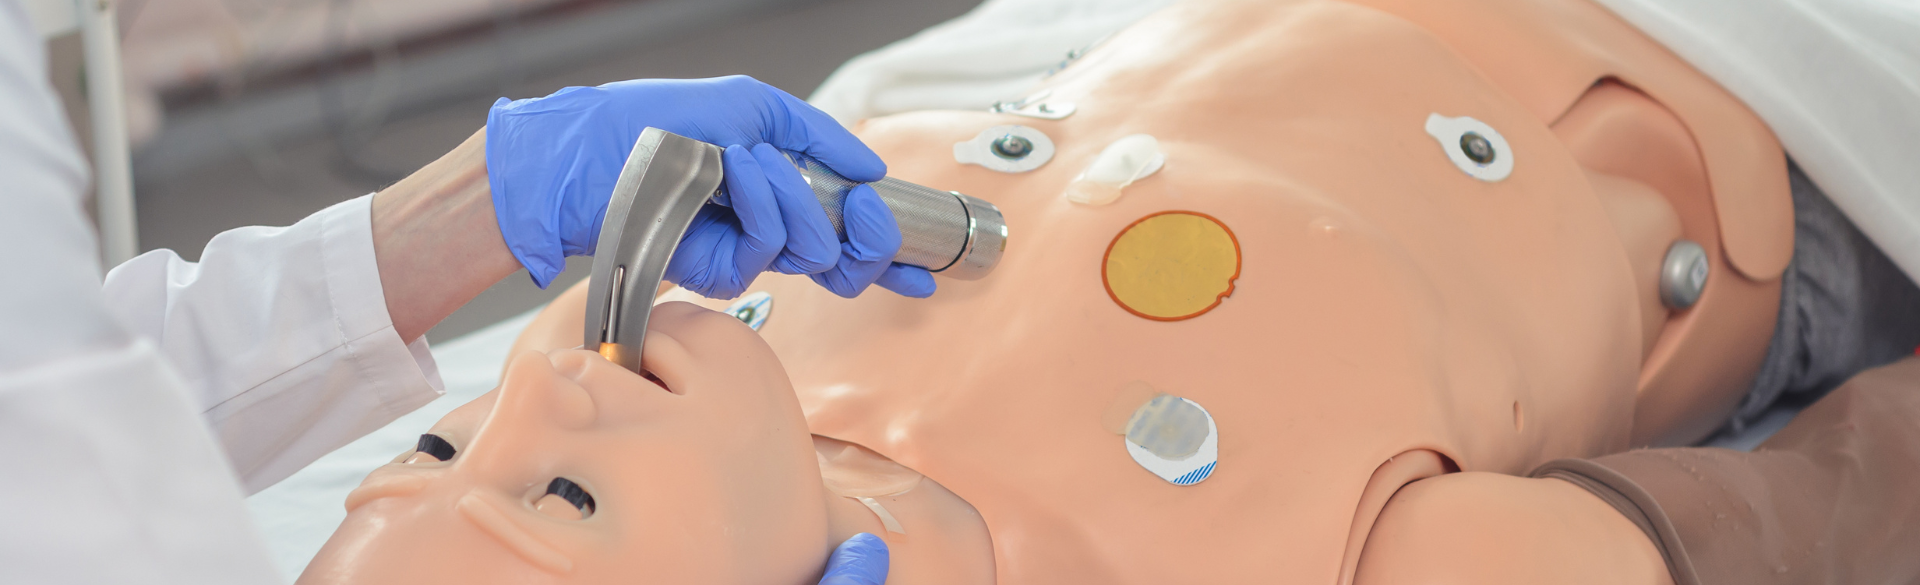 Physician performs intubation on mannequin